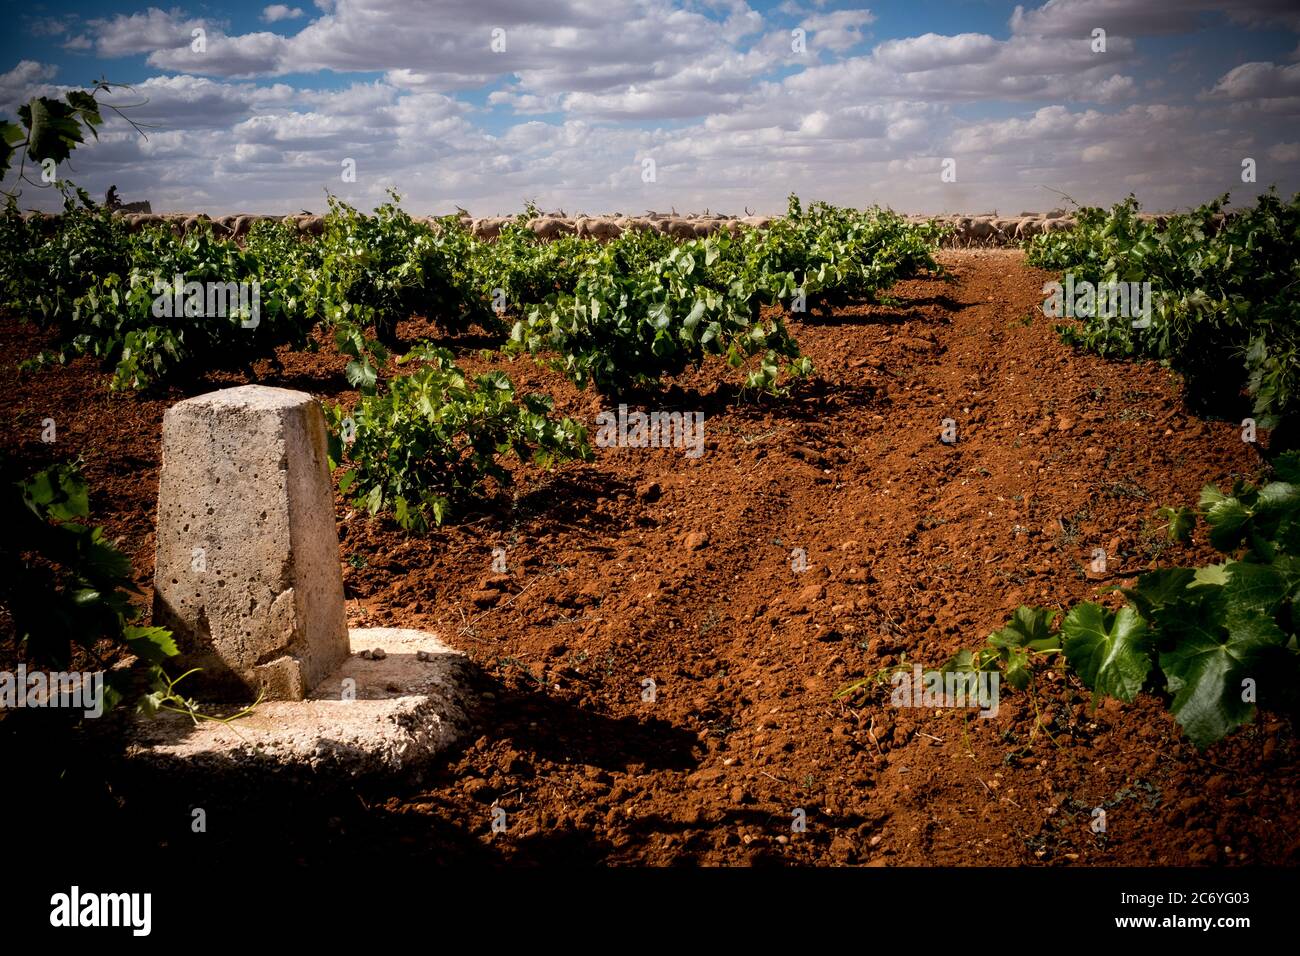 Milestone that marks the limit of the Cañada Real stands in the middle of a vineyard close to Socuellamos, Spain. Date: 17-06-2016. Photographer: Xabier Mikel Laburu. Many farmers invade the public terrain of the Cañada Real to plant a few more meters of their crops. Stock Photo